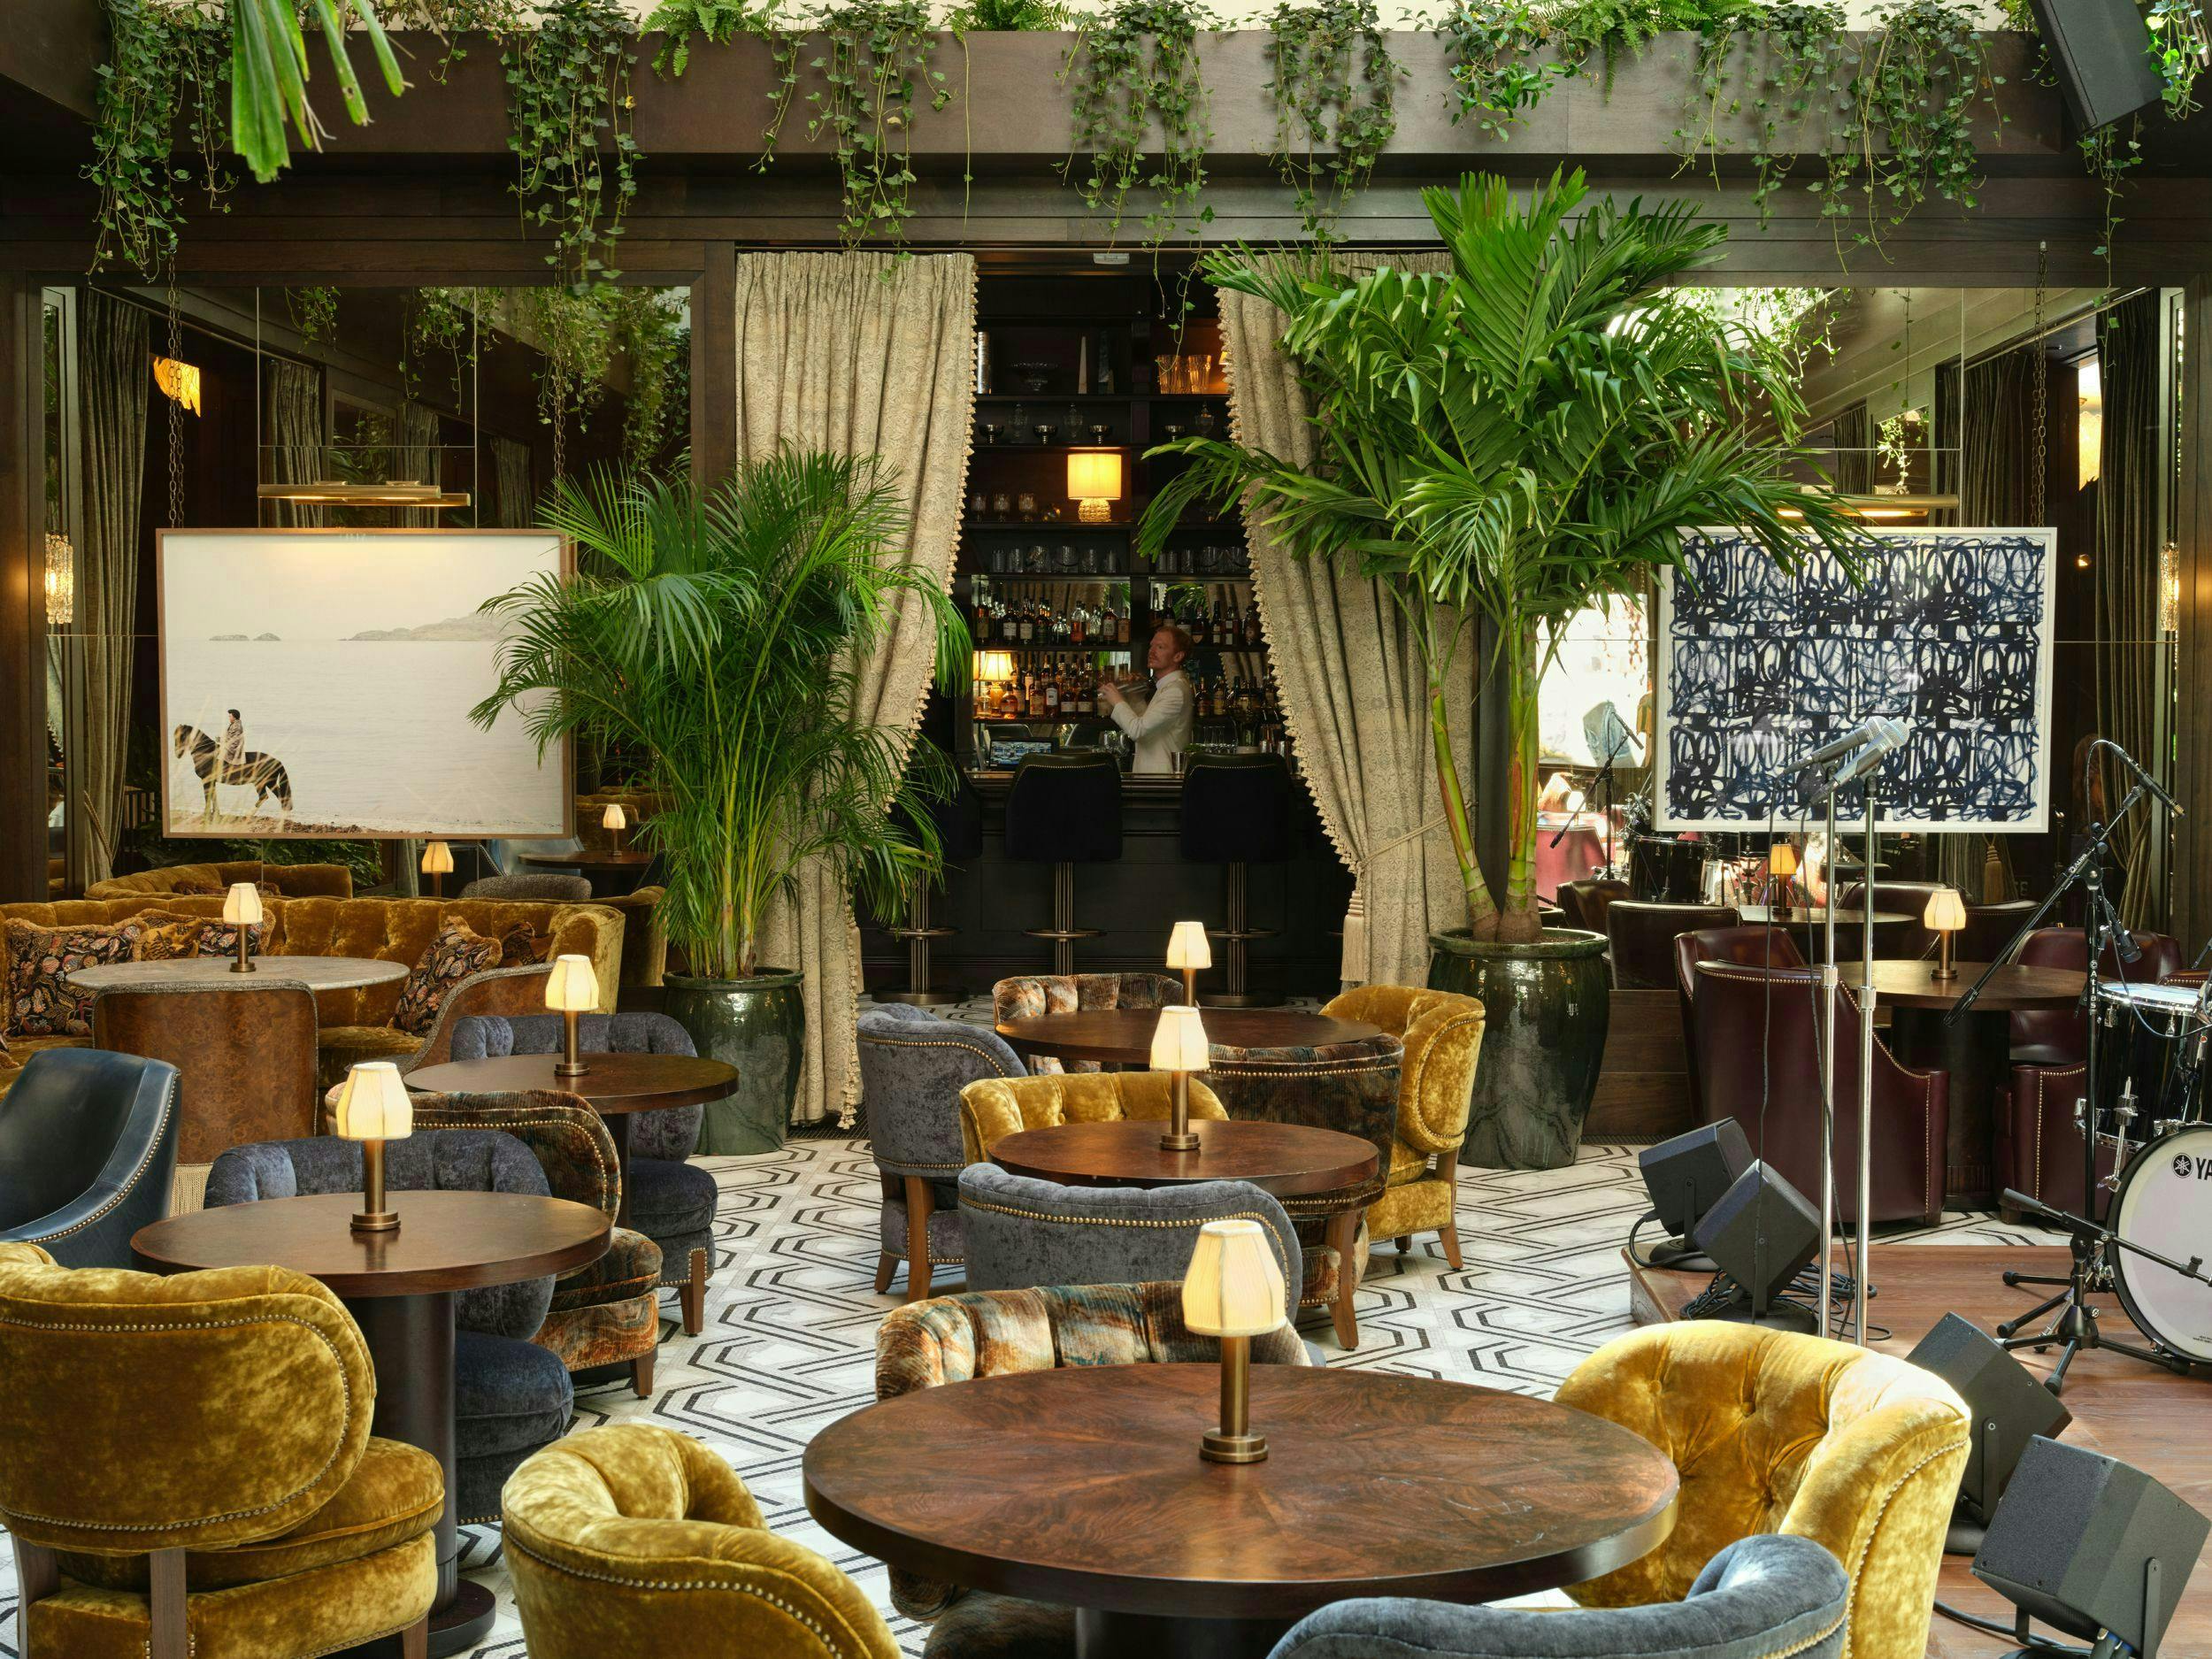 The Ned NoMad hotel is pictured. Tables with yellow chairs and lots of greenery fill the room.